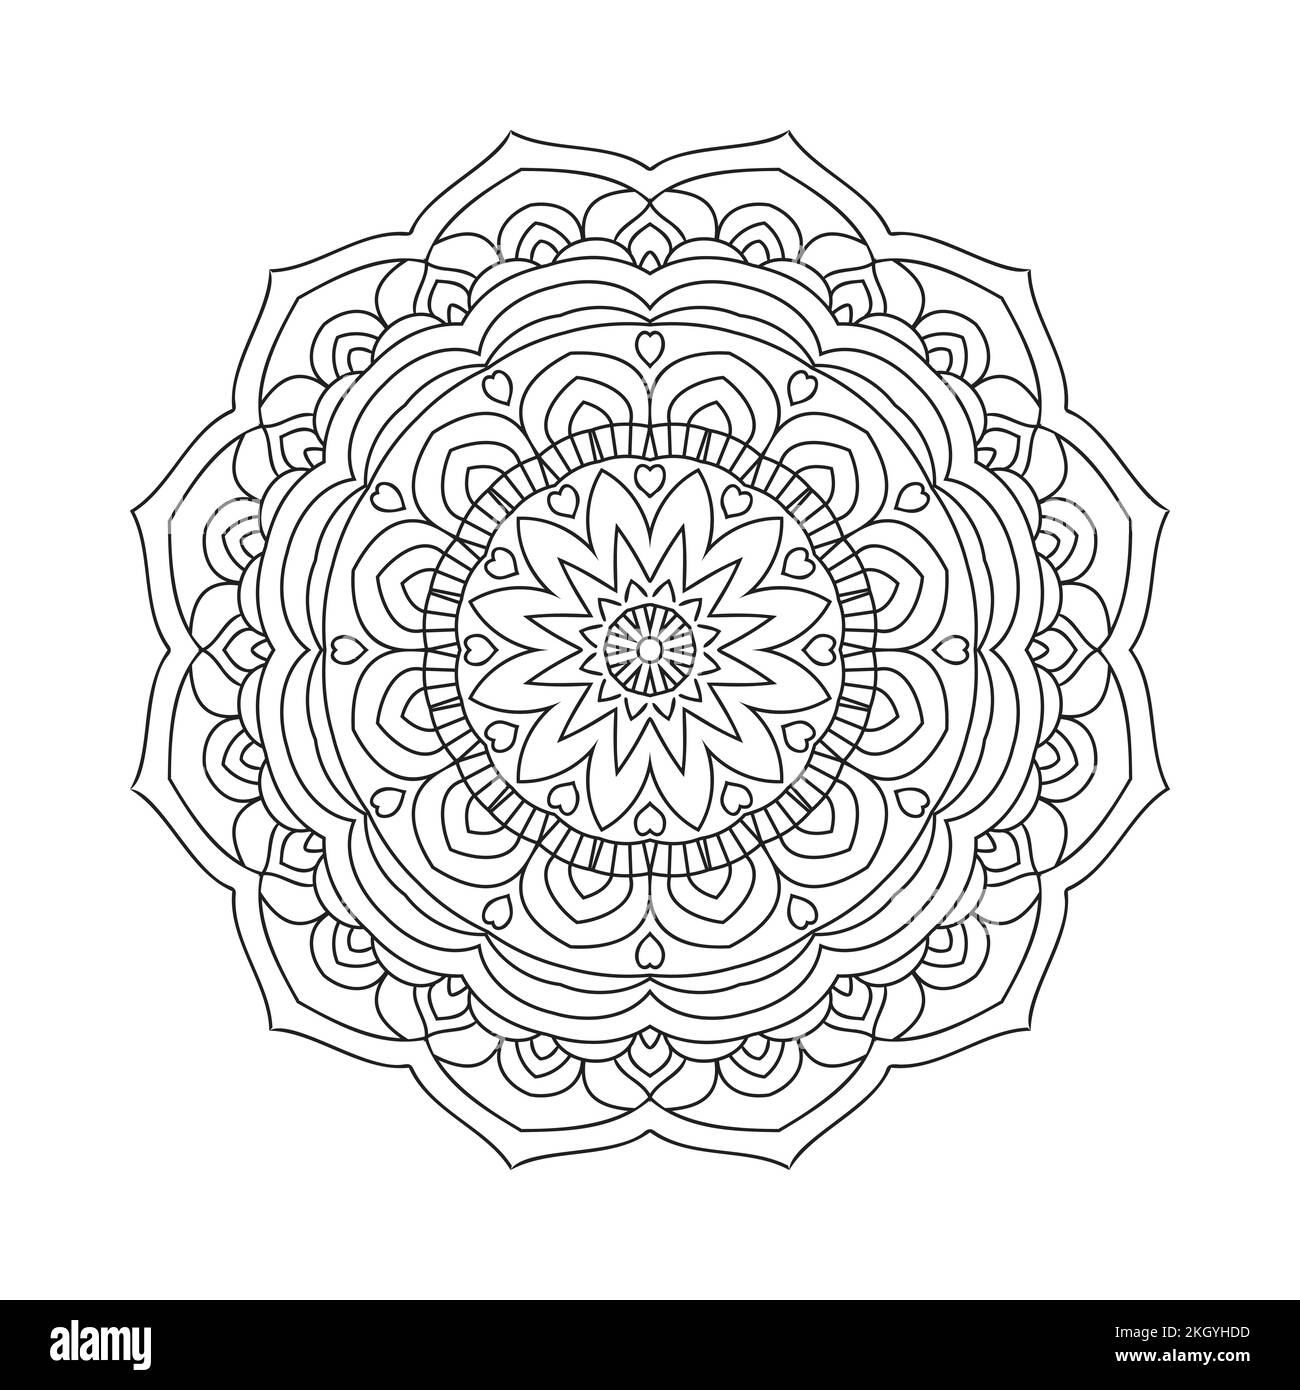 Decoration mandala ornament line art vector. Kids coloring page. Traditional Indian floral mandala pattern. Circular mandala ornament pattern vector. Stock Vector